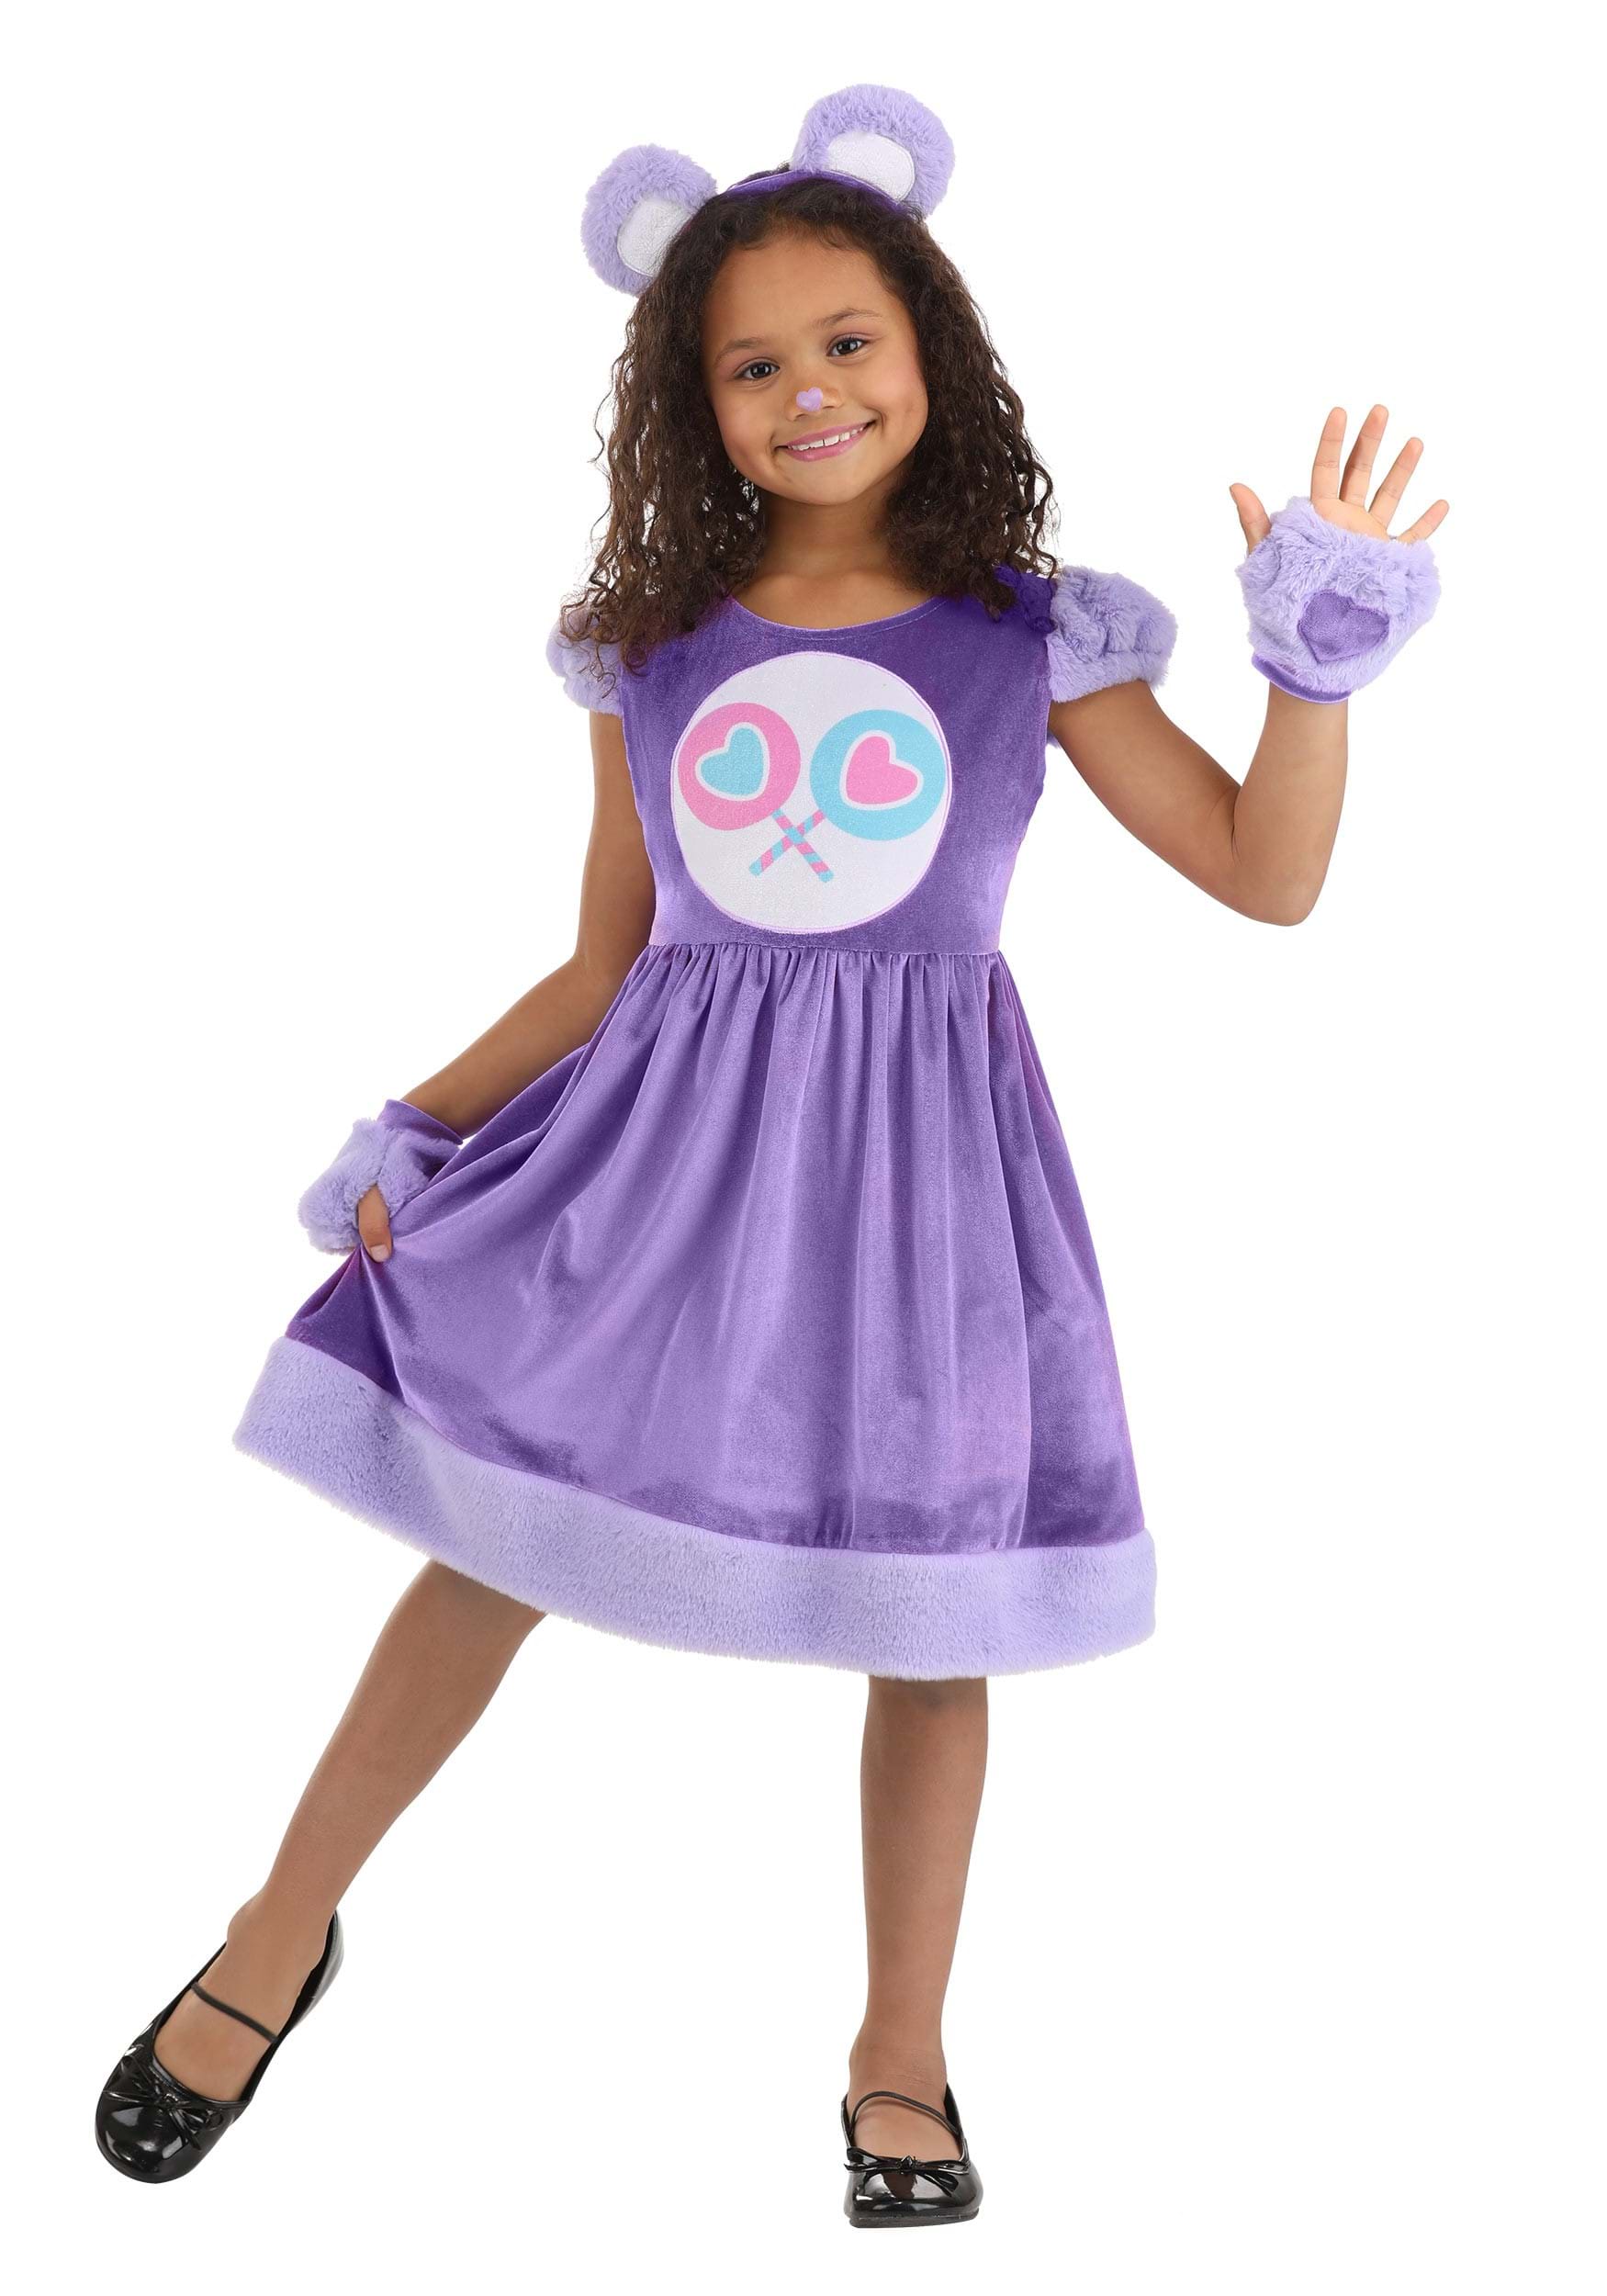 Photos - Fancy Dress BEAR FUN Costumes Share  Party Dress Costume for Girls Purple/Pink/ 